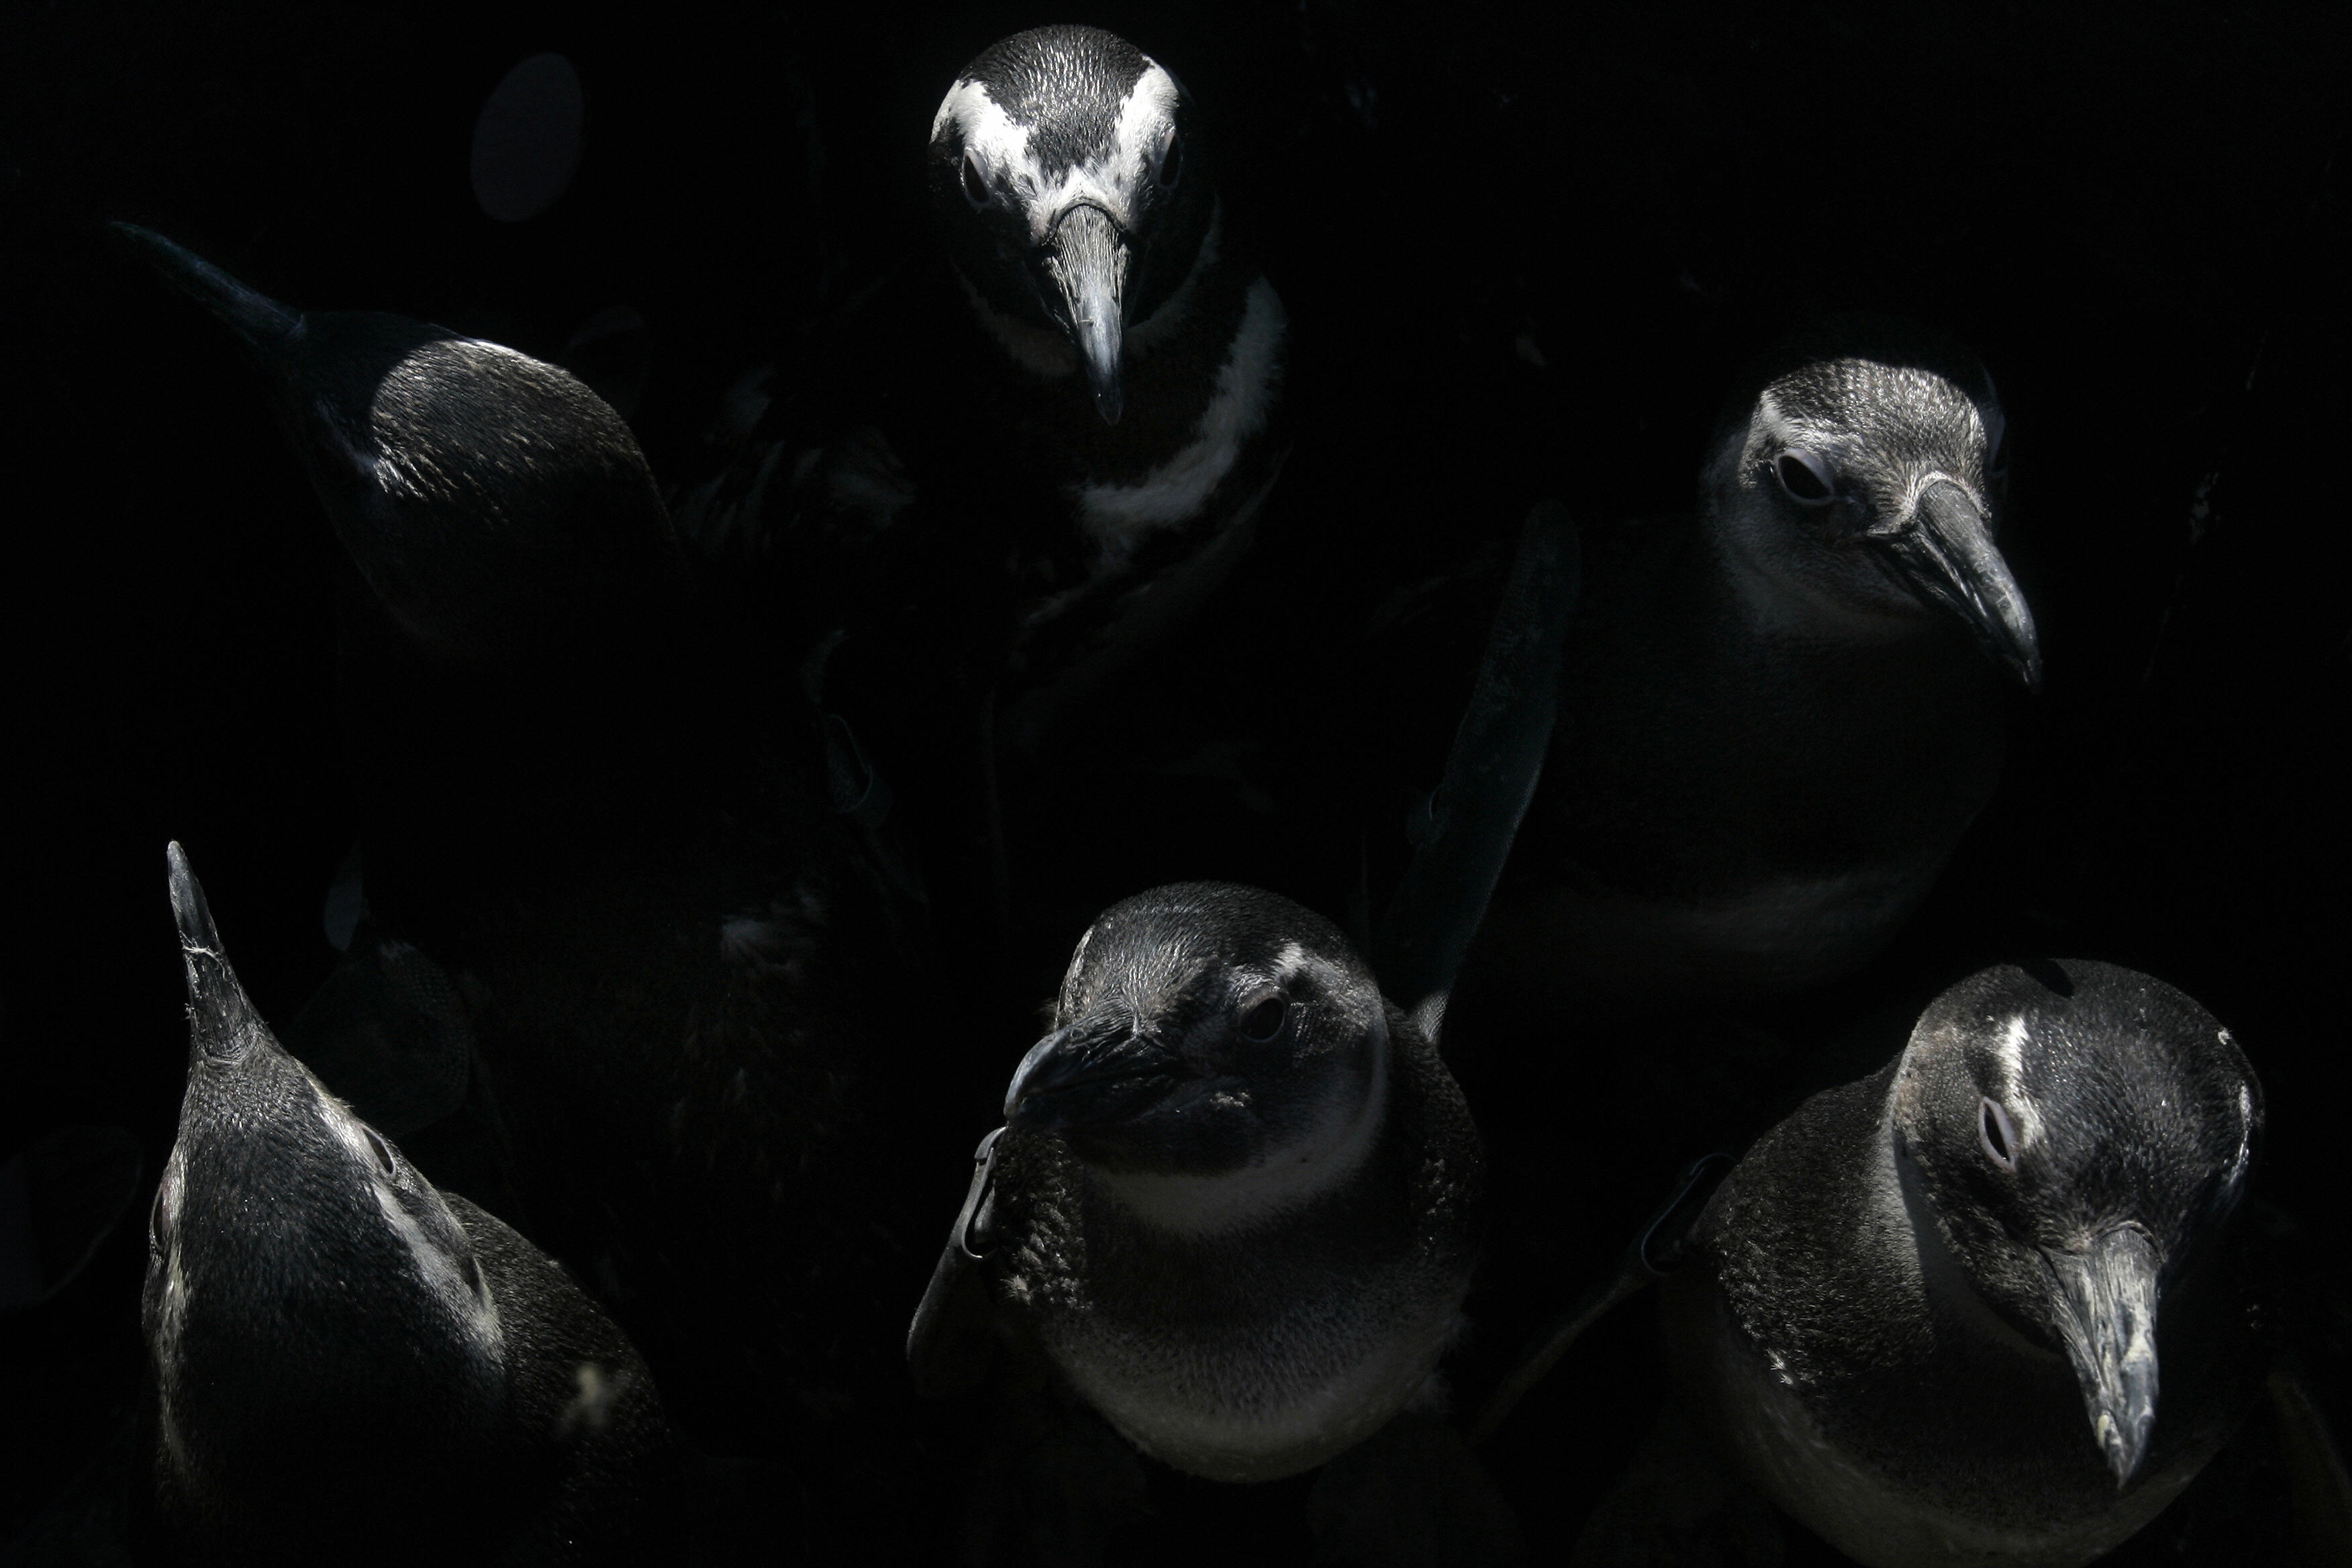 Magellanic penguins are seen in a box on